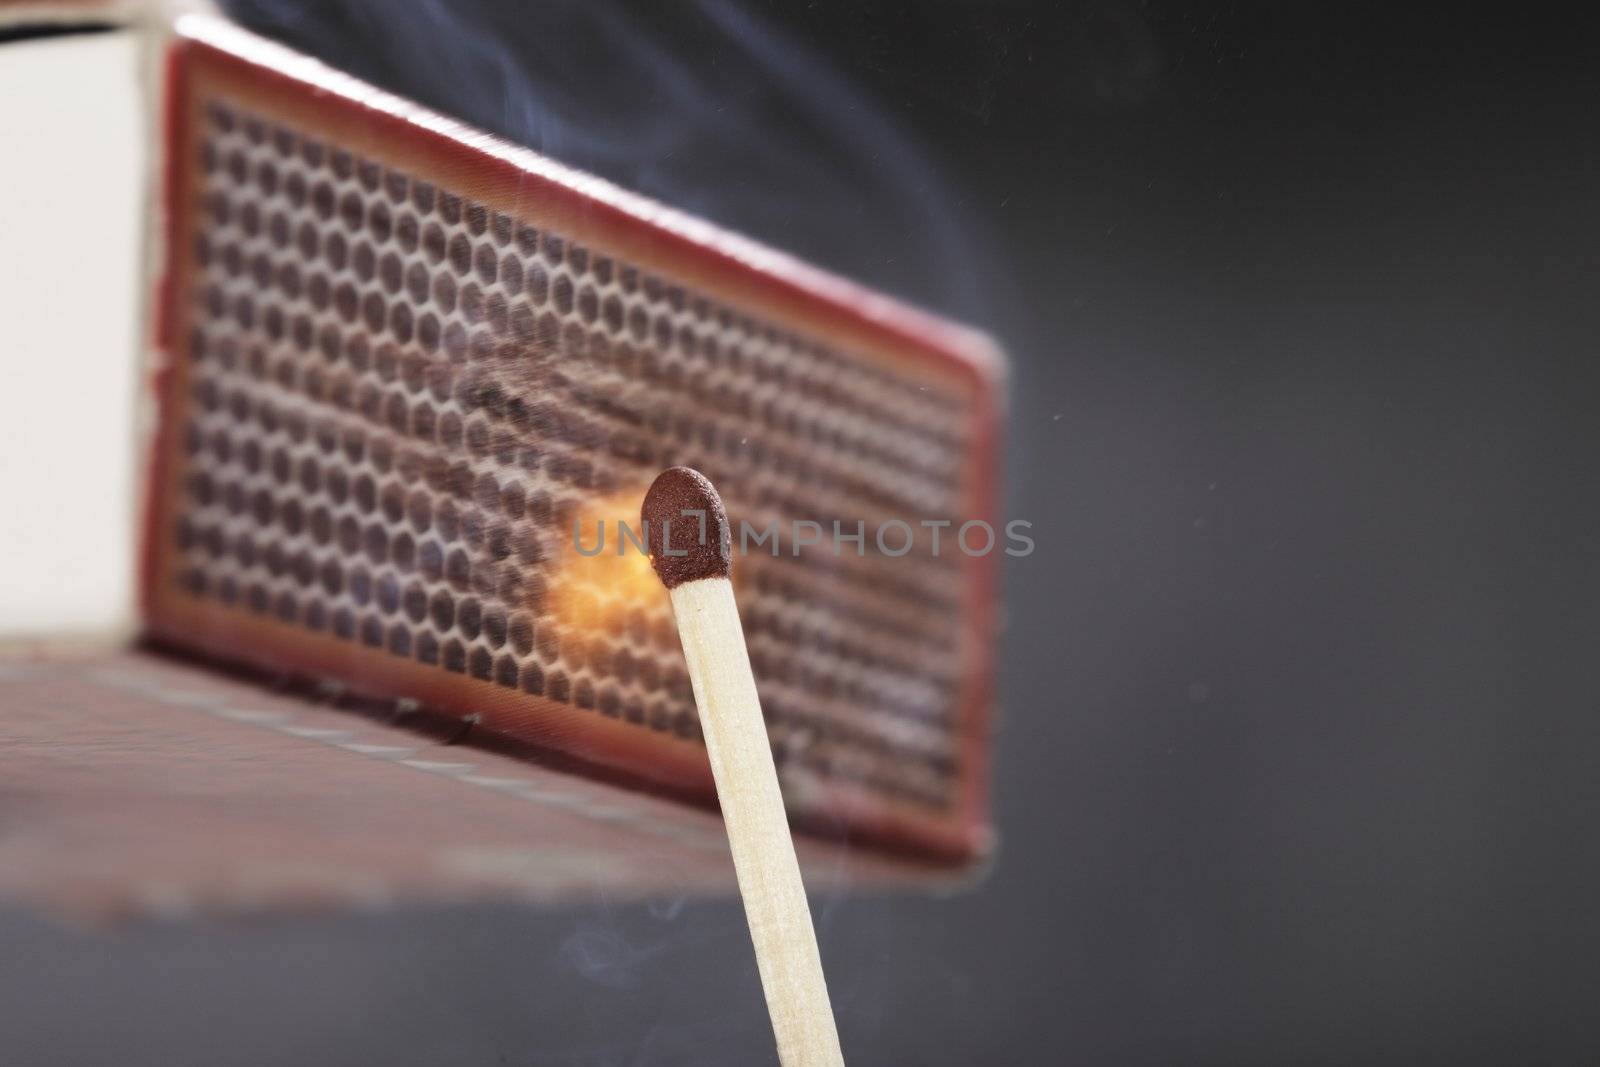 A Match ignited by rubbing the match head against a match box.